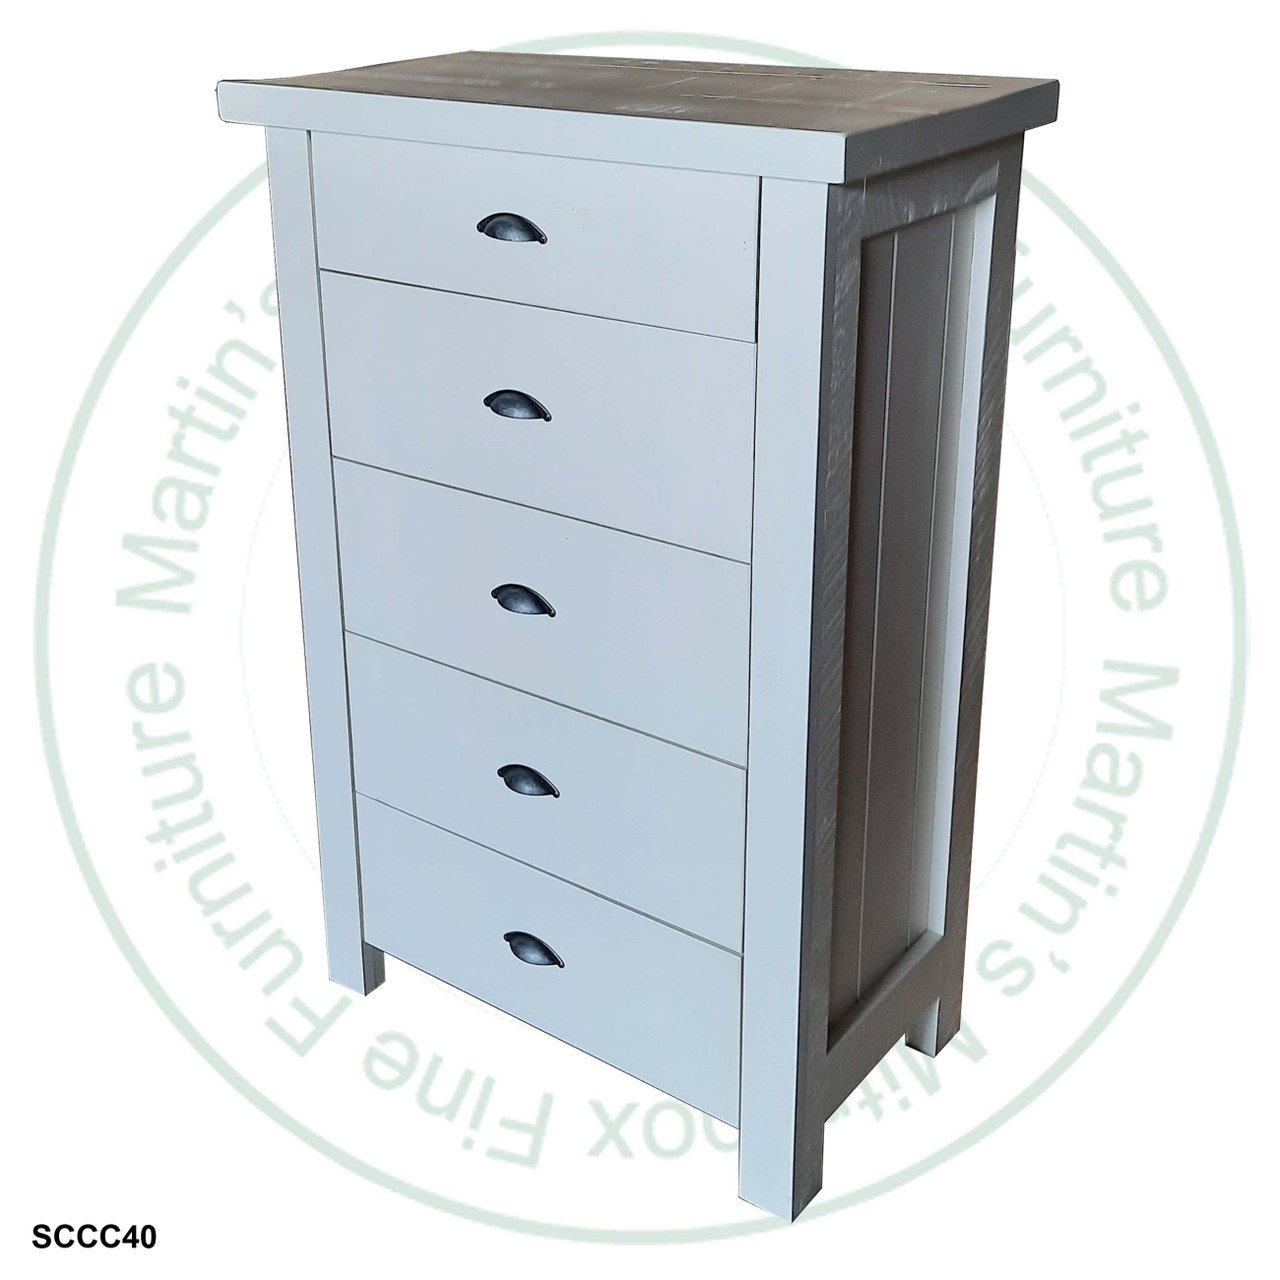 Pine Frontier Chest Of Drawers 39''W x 52''H x 18.5''D